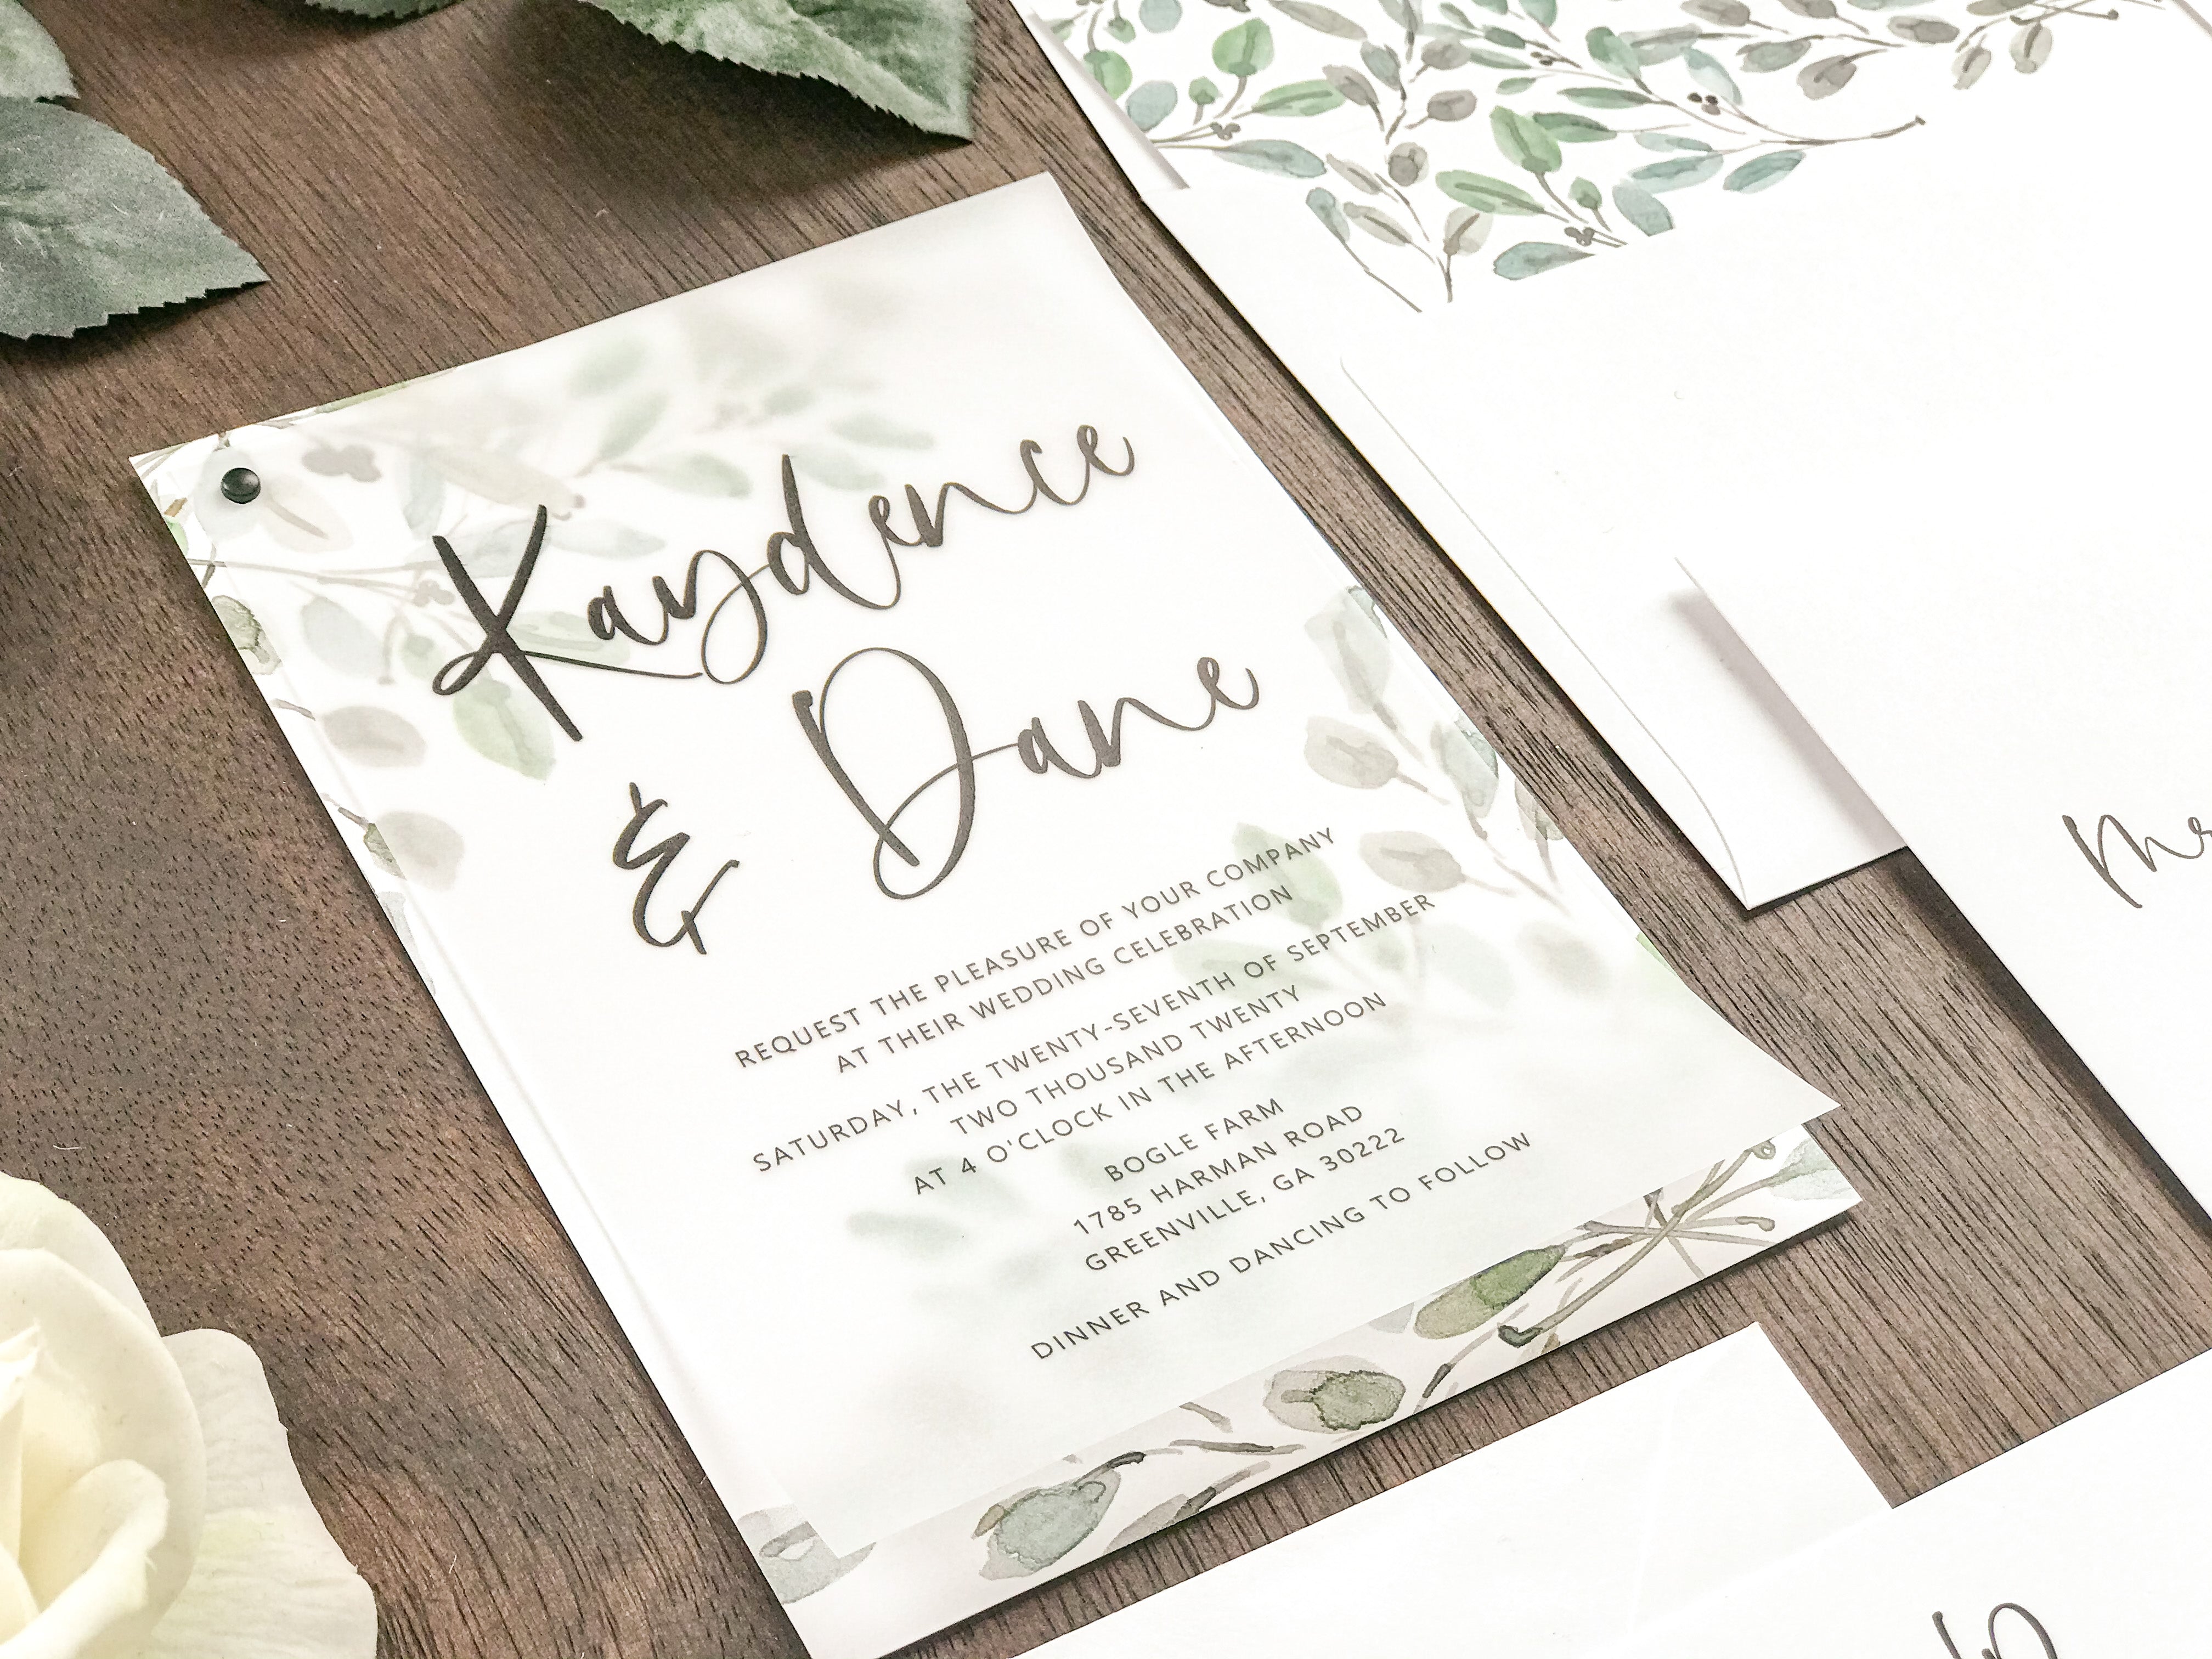 Vellum Sheet ONLY with Printed Greenery – Creative Custom Prints by Tabitha